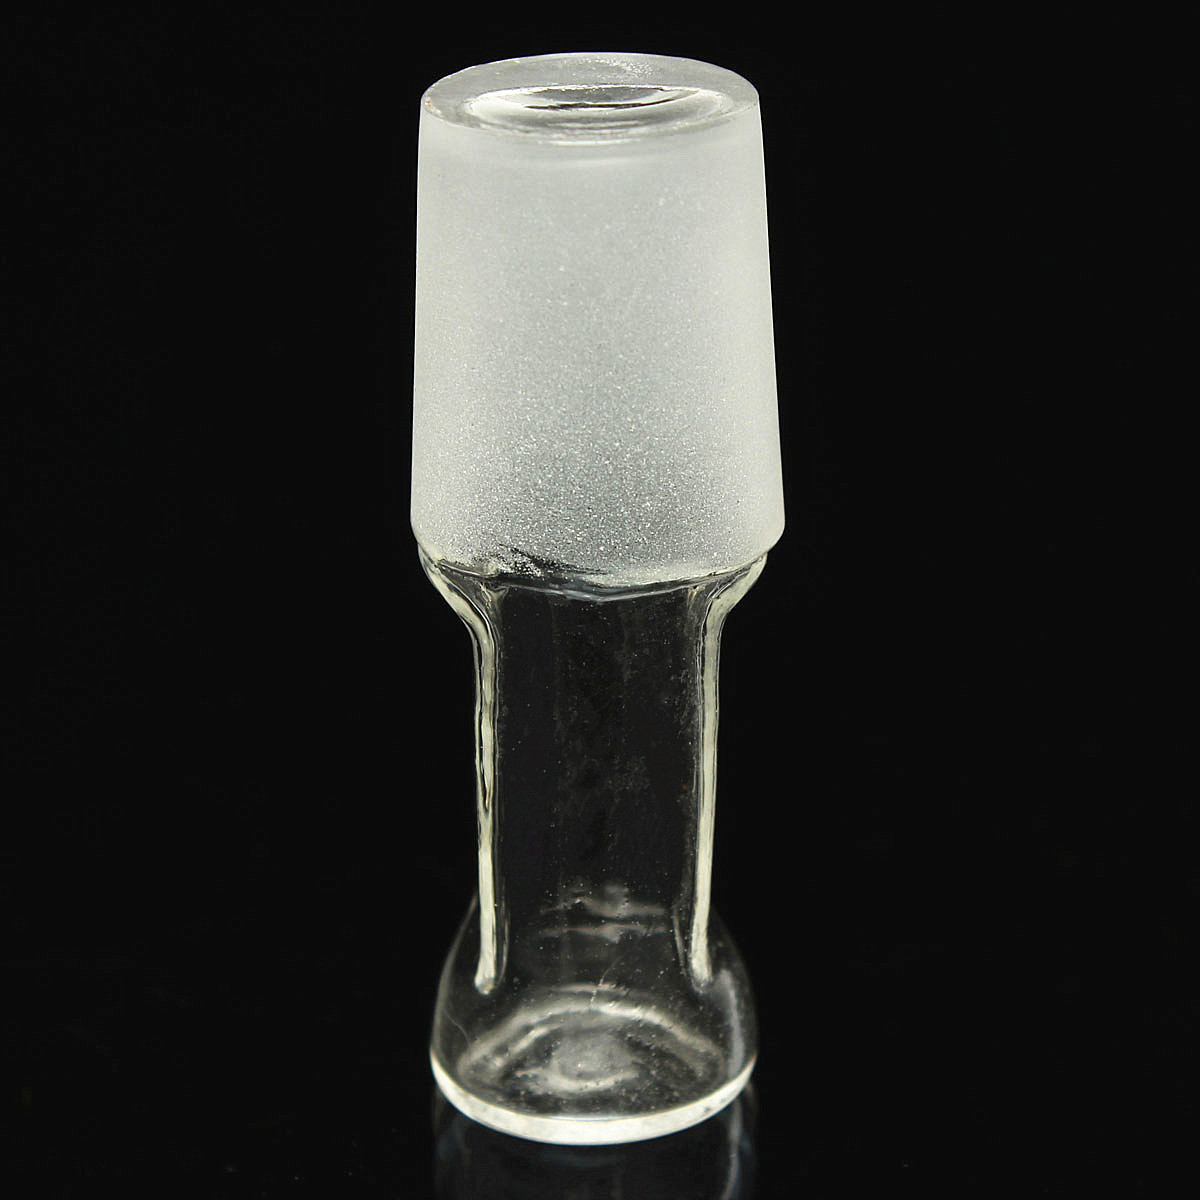 

24/29 Taper Hollow Glass Stopper Ground Joint Stopper Plug Cap Laboratory Glassware